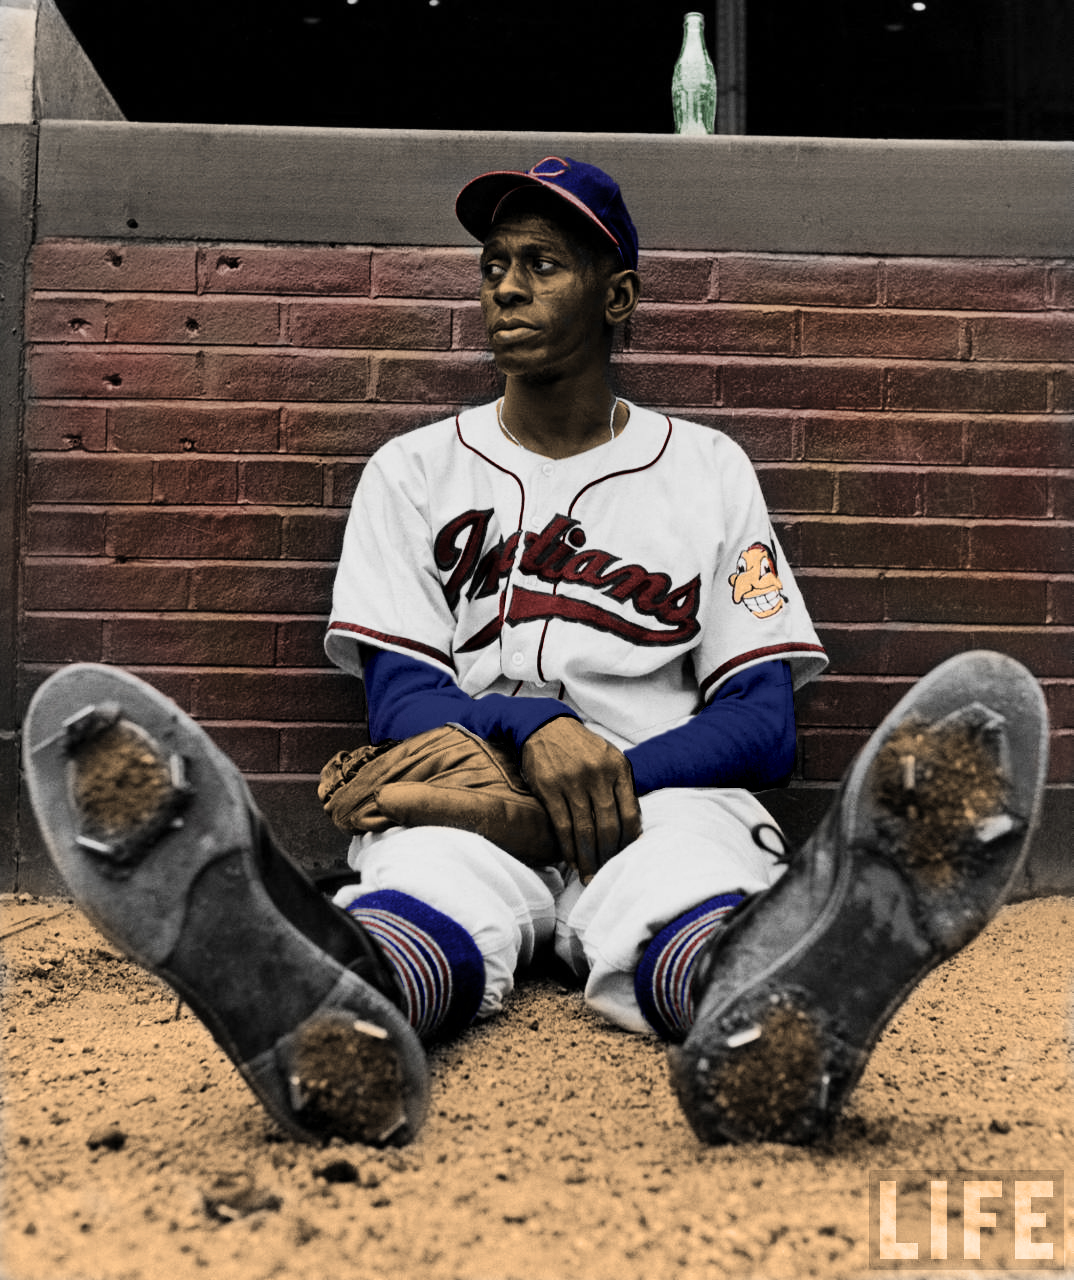 On This Day In Sports: August 3, 1948, Satchel Paige Makes His